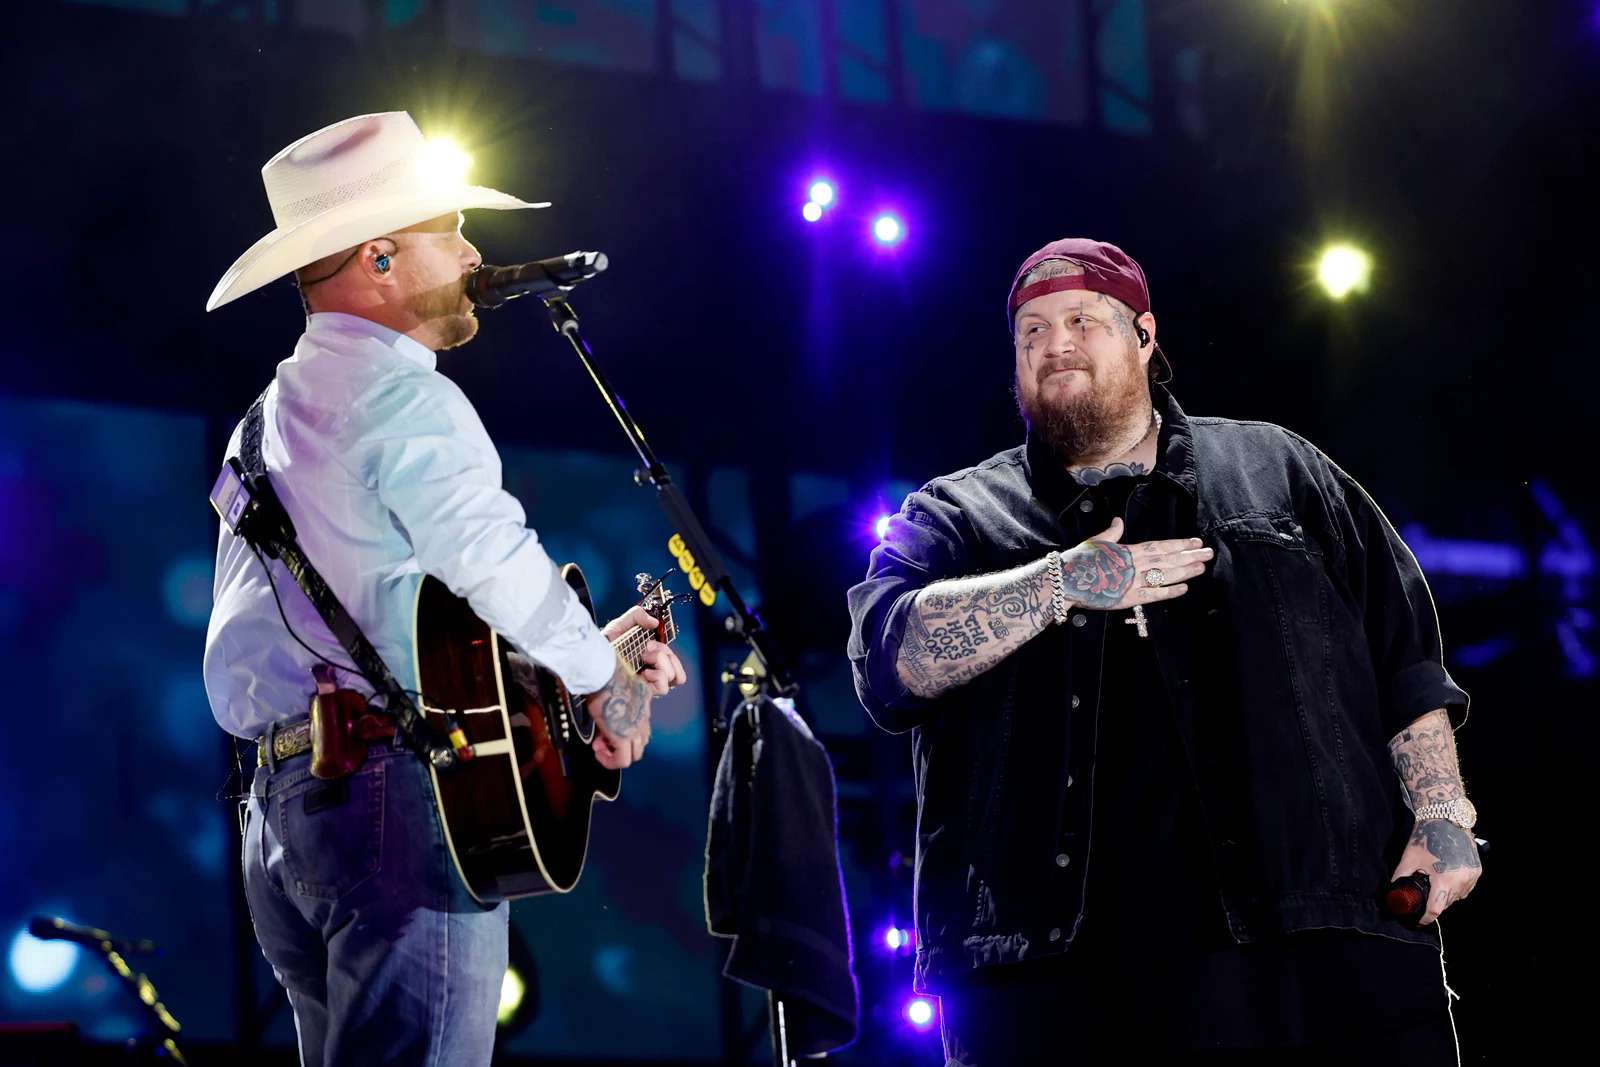 CMA Fest Day 2: Jelly Roll Joins Cody Johnson for Surprise Show